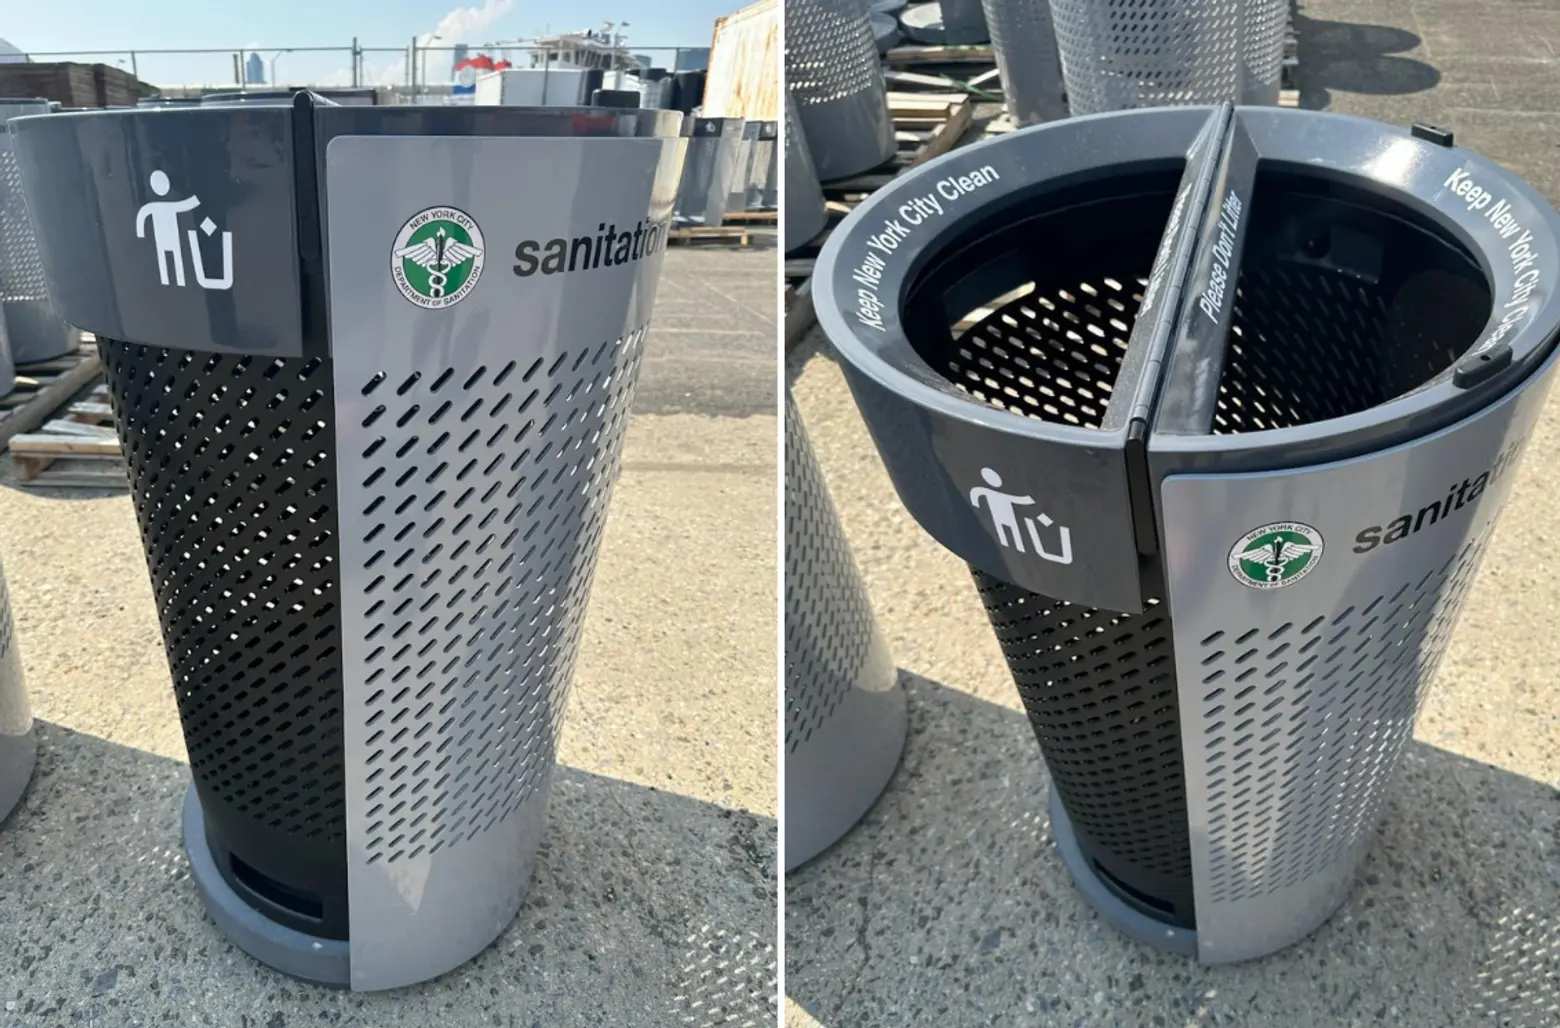 NYC unveils new trash can that will replace ‘iconic’ green mesh bins